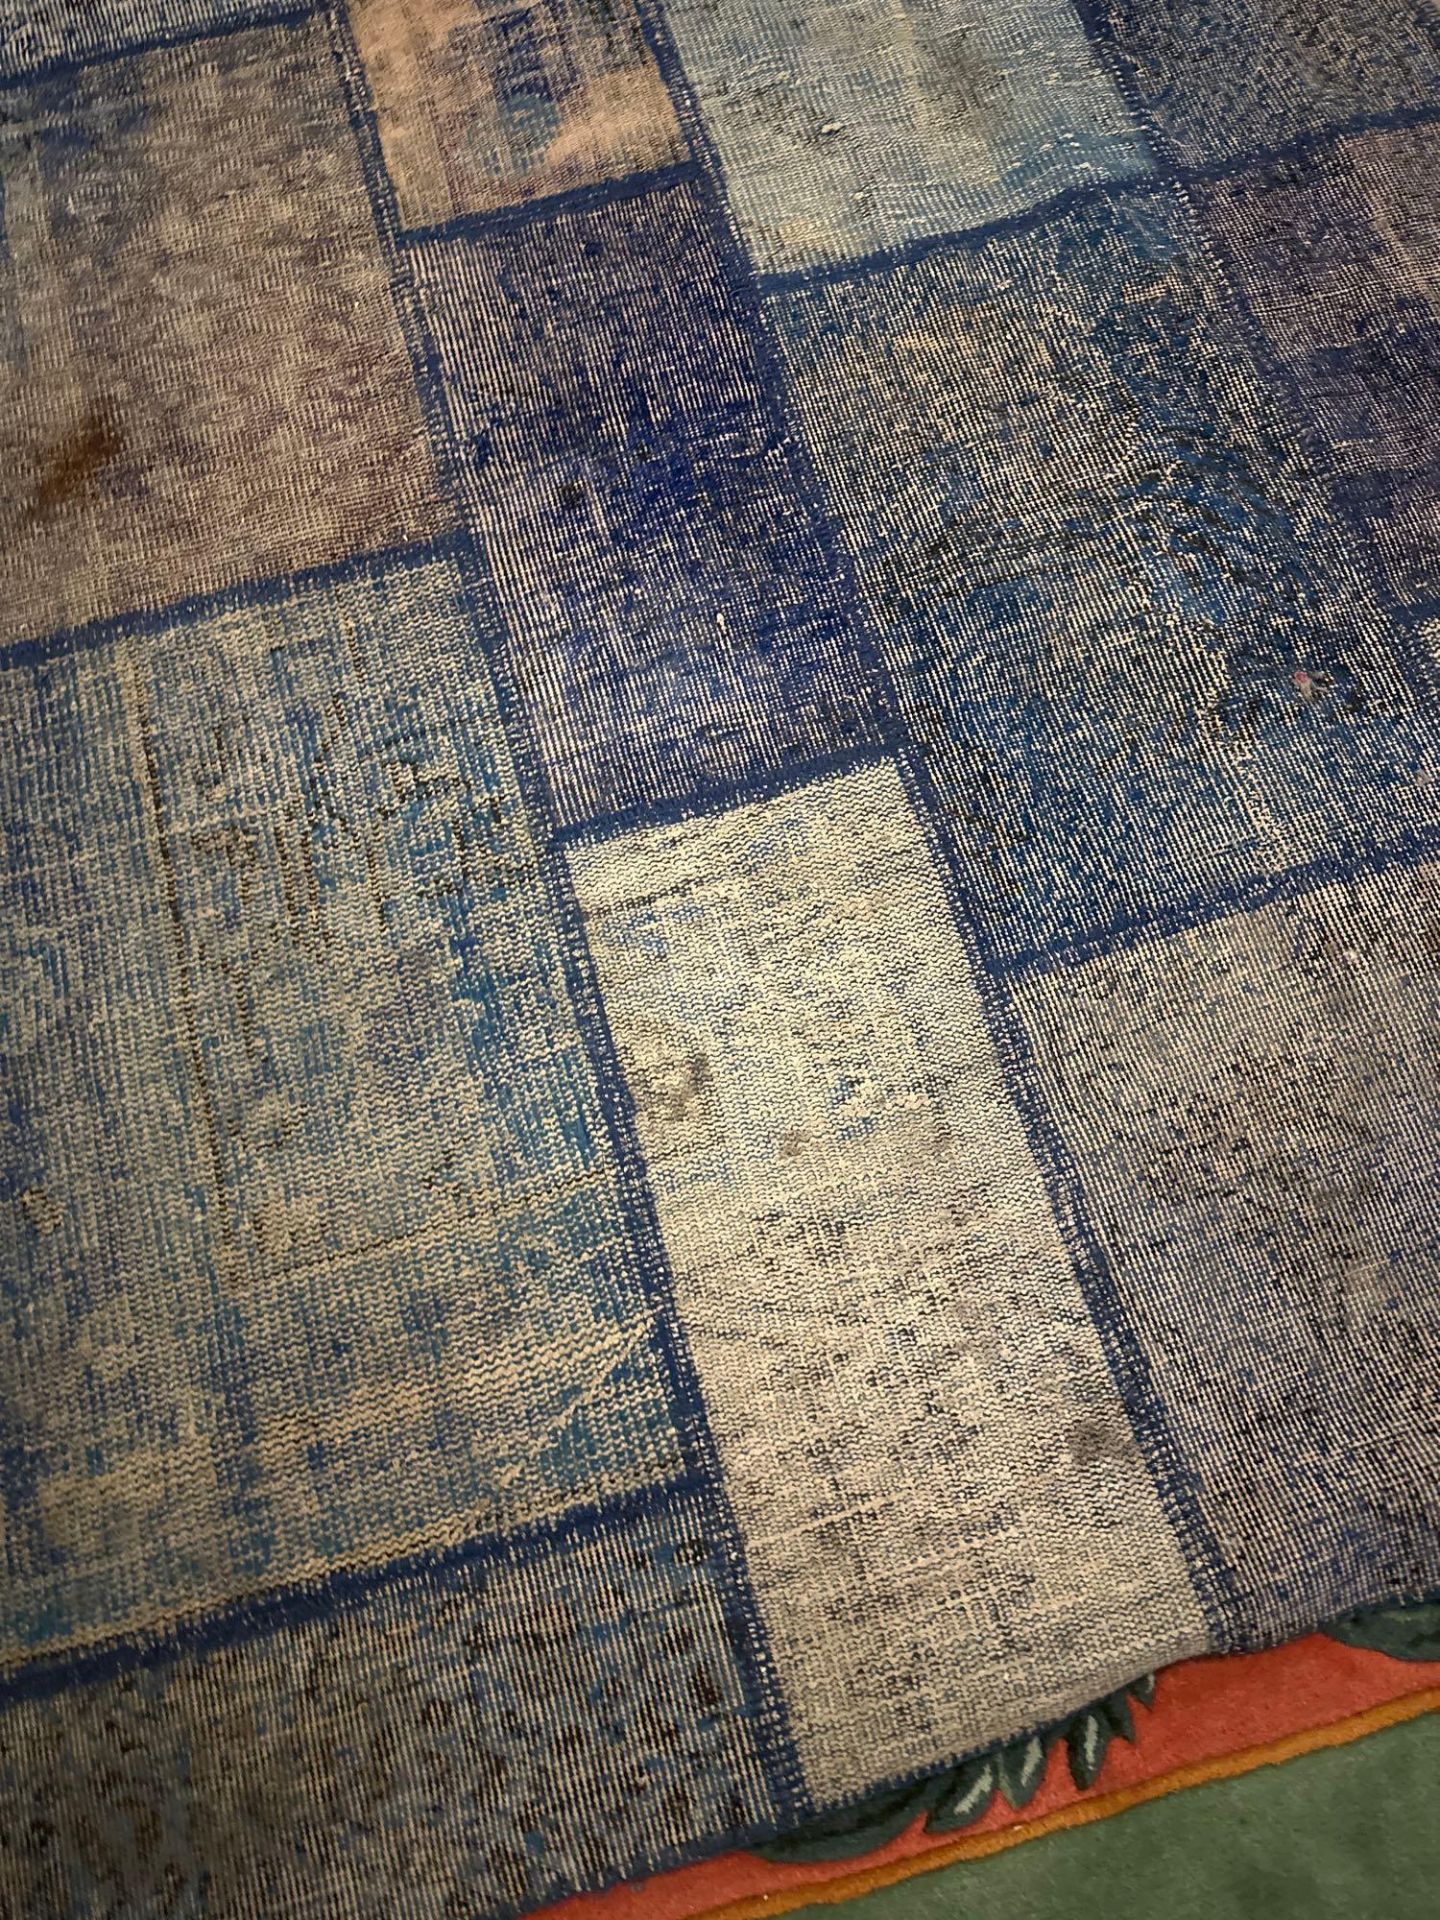 Multicolour Overdyed Patchwork Blue Patterned Rug 198 X 298 cm - Image 3 of 5